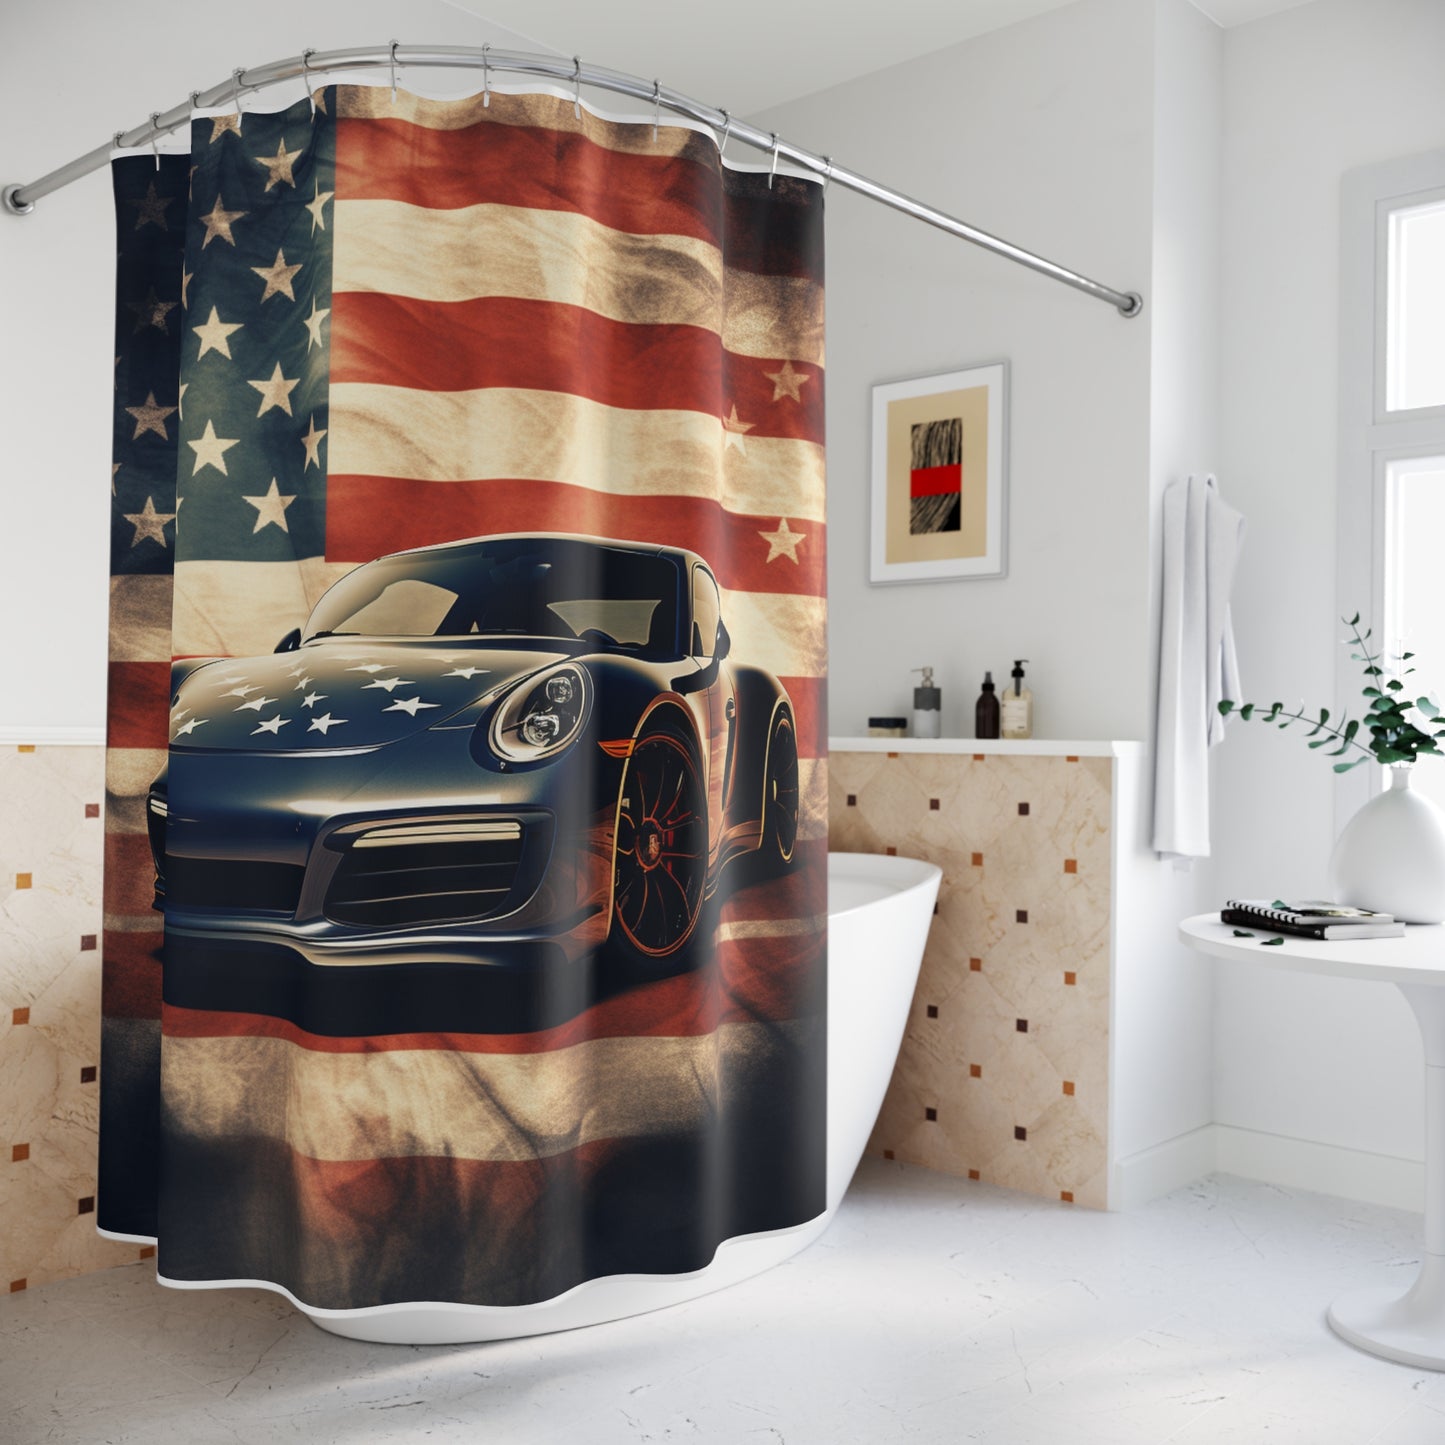 Polyester Shower Curtain Abstract American Flag Background Porsche 3